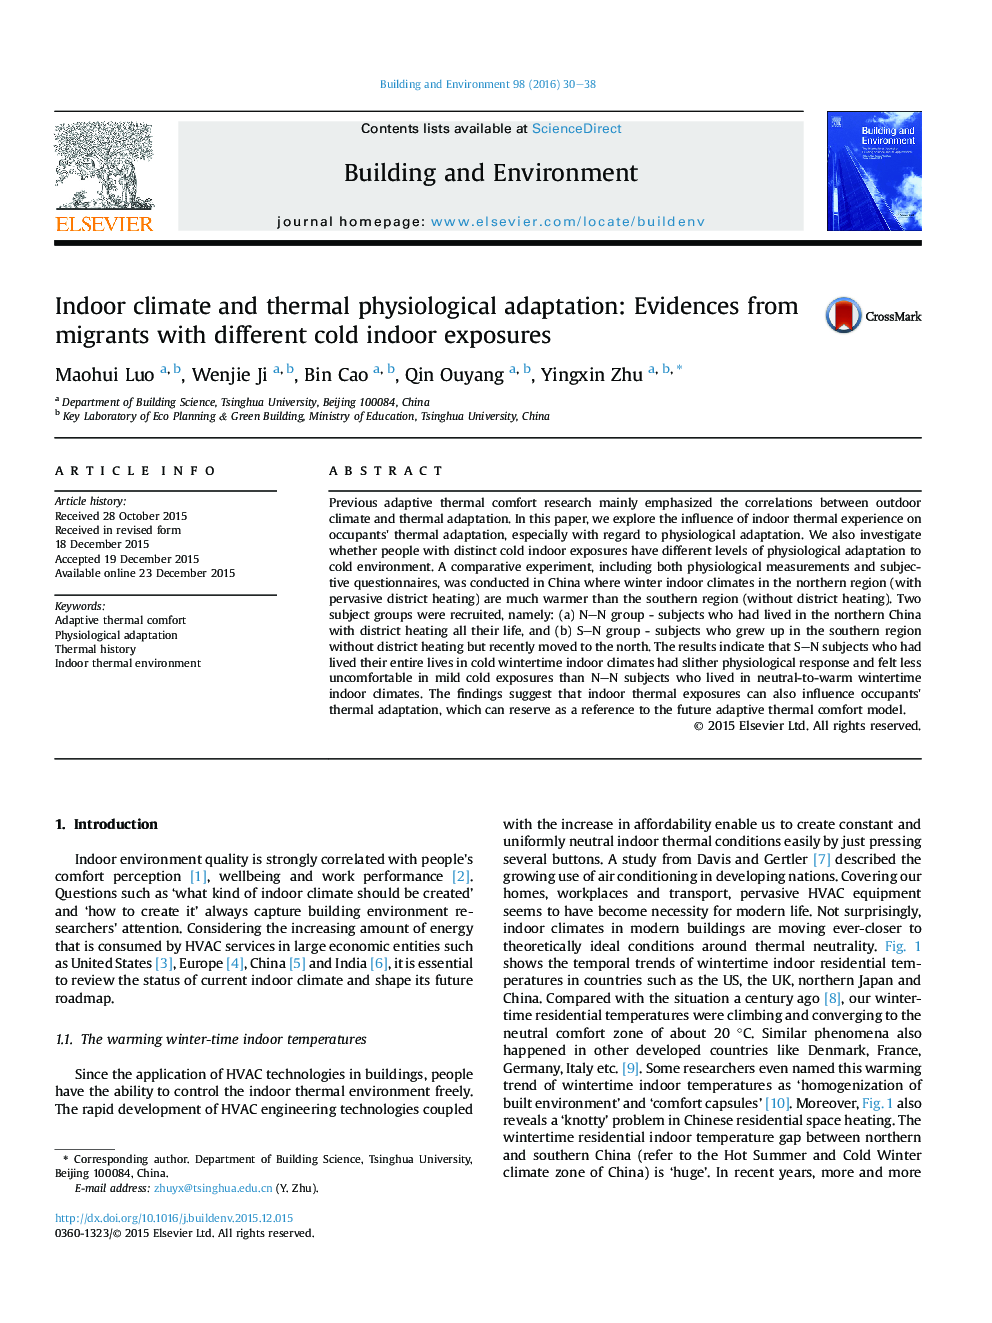 Indoor climate and thermal physiological adaptation: Evidences from migrants with different cold indoor exposures